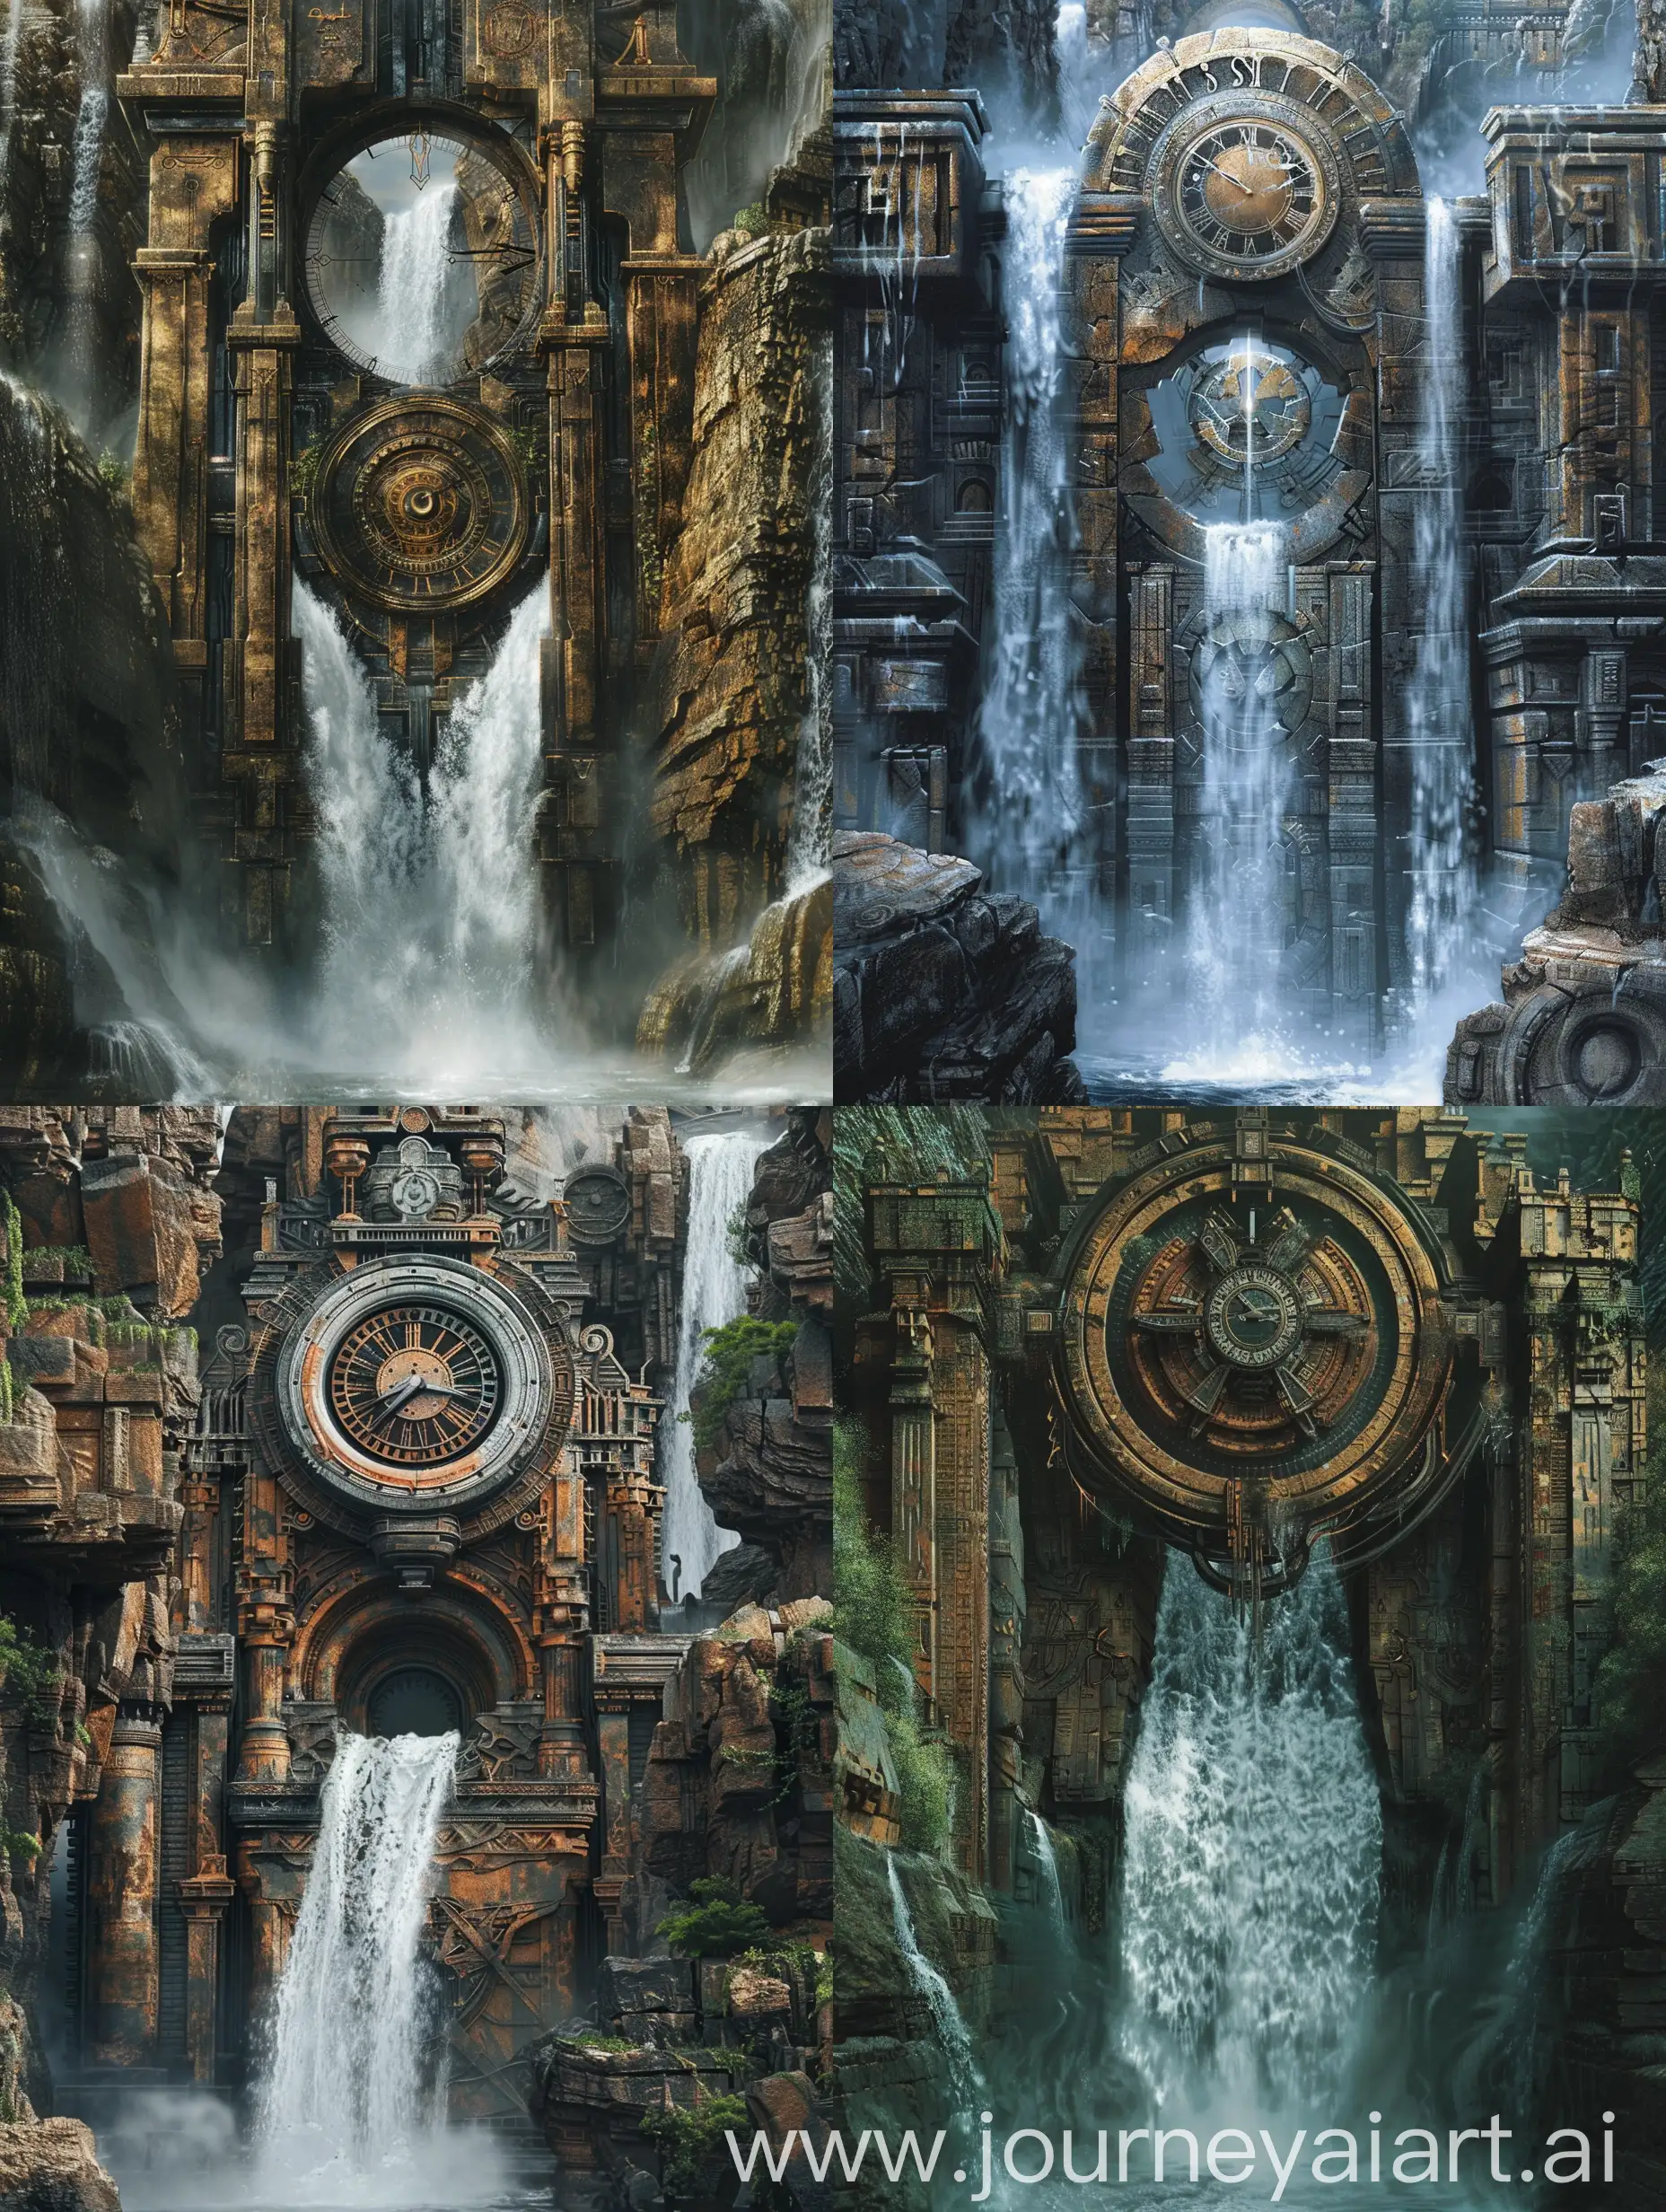 Mystical-Waterfall-with-Ancient-Ruins-and-Clock-Hyperrealistic-Fantasy-Art